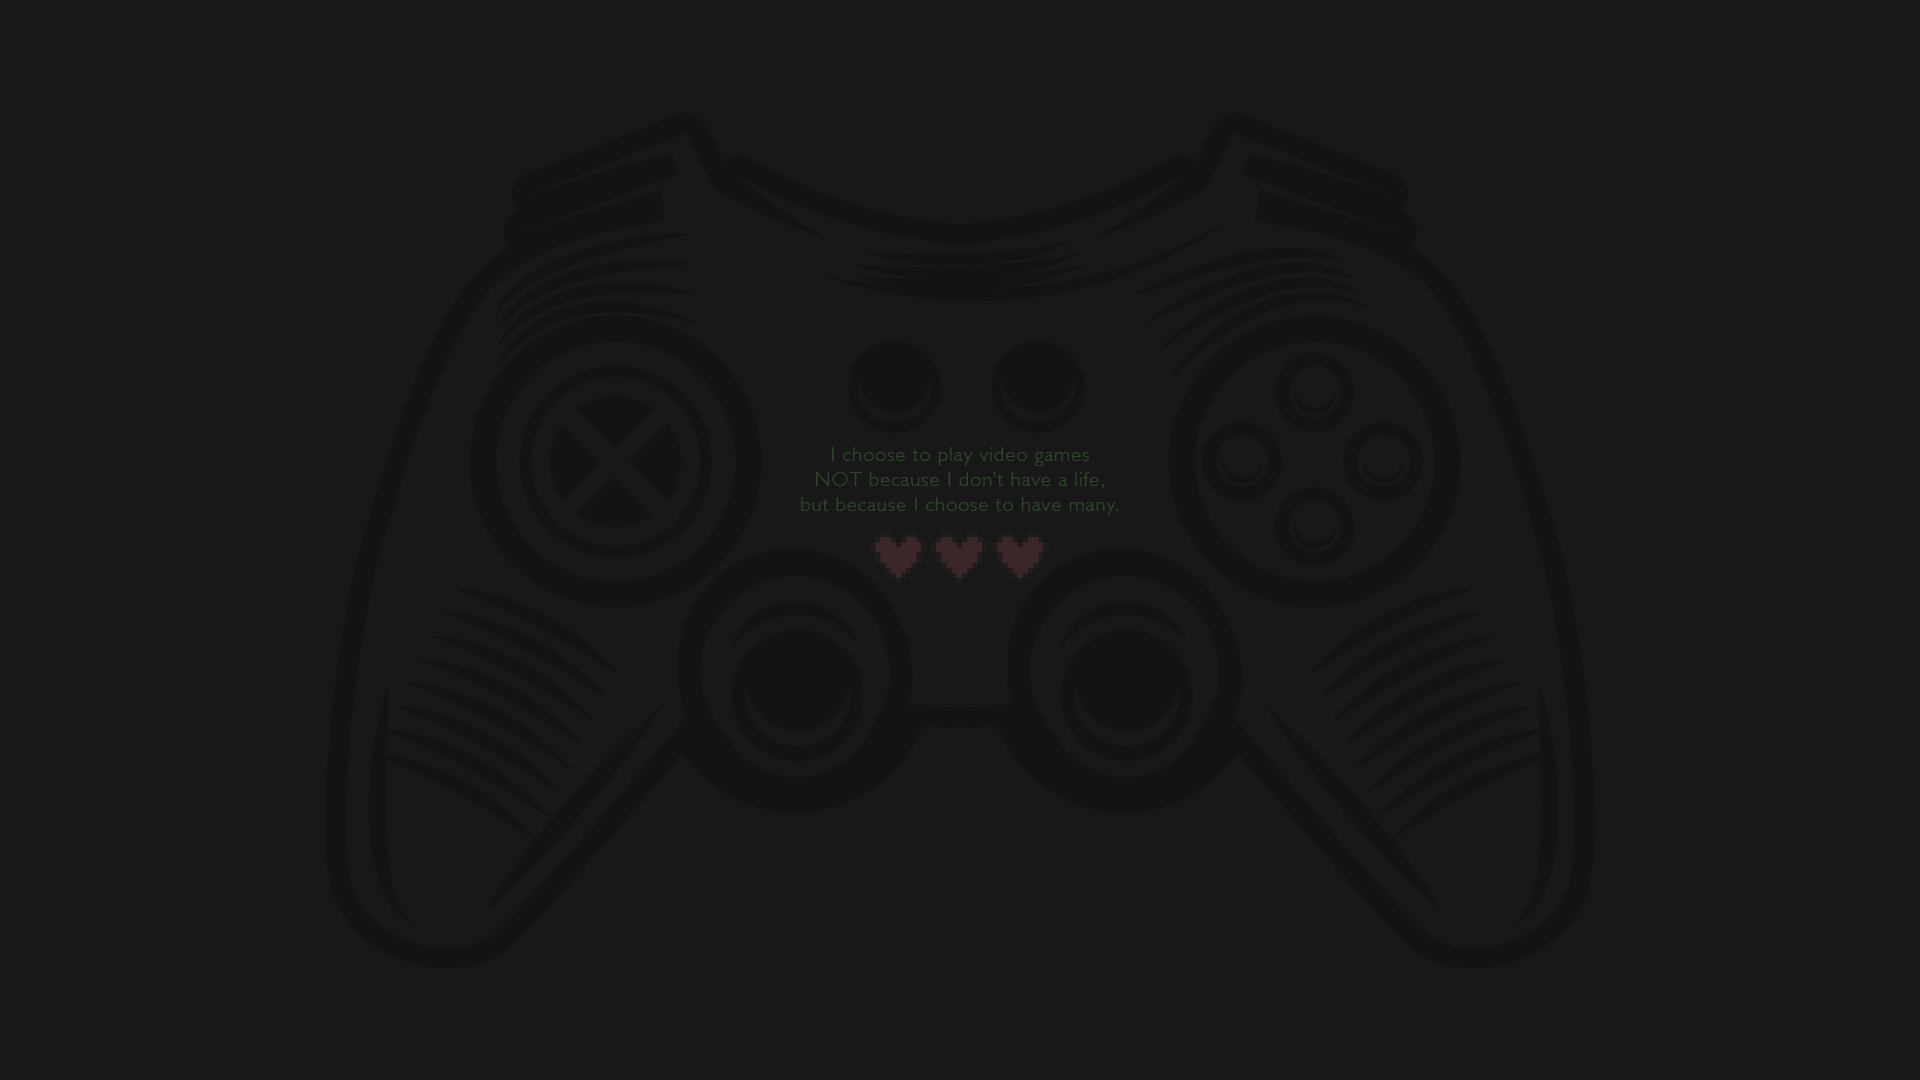 Xbox Controller Minimalist Wallpapers